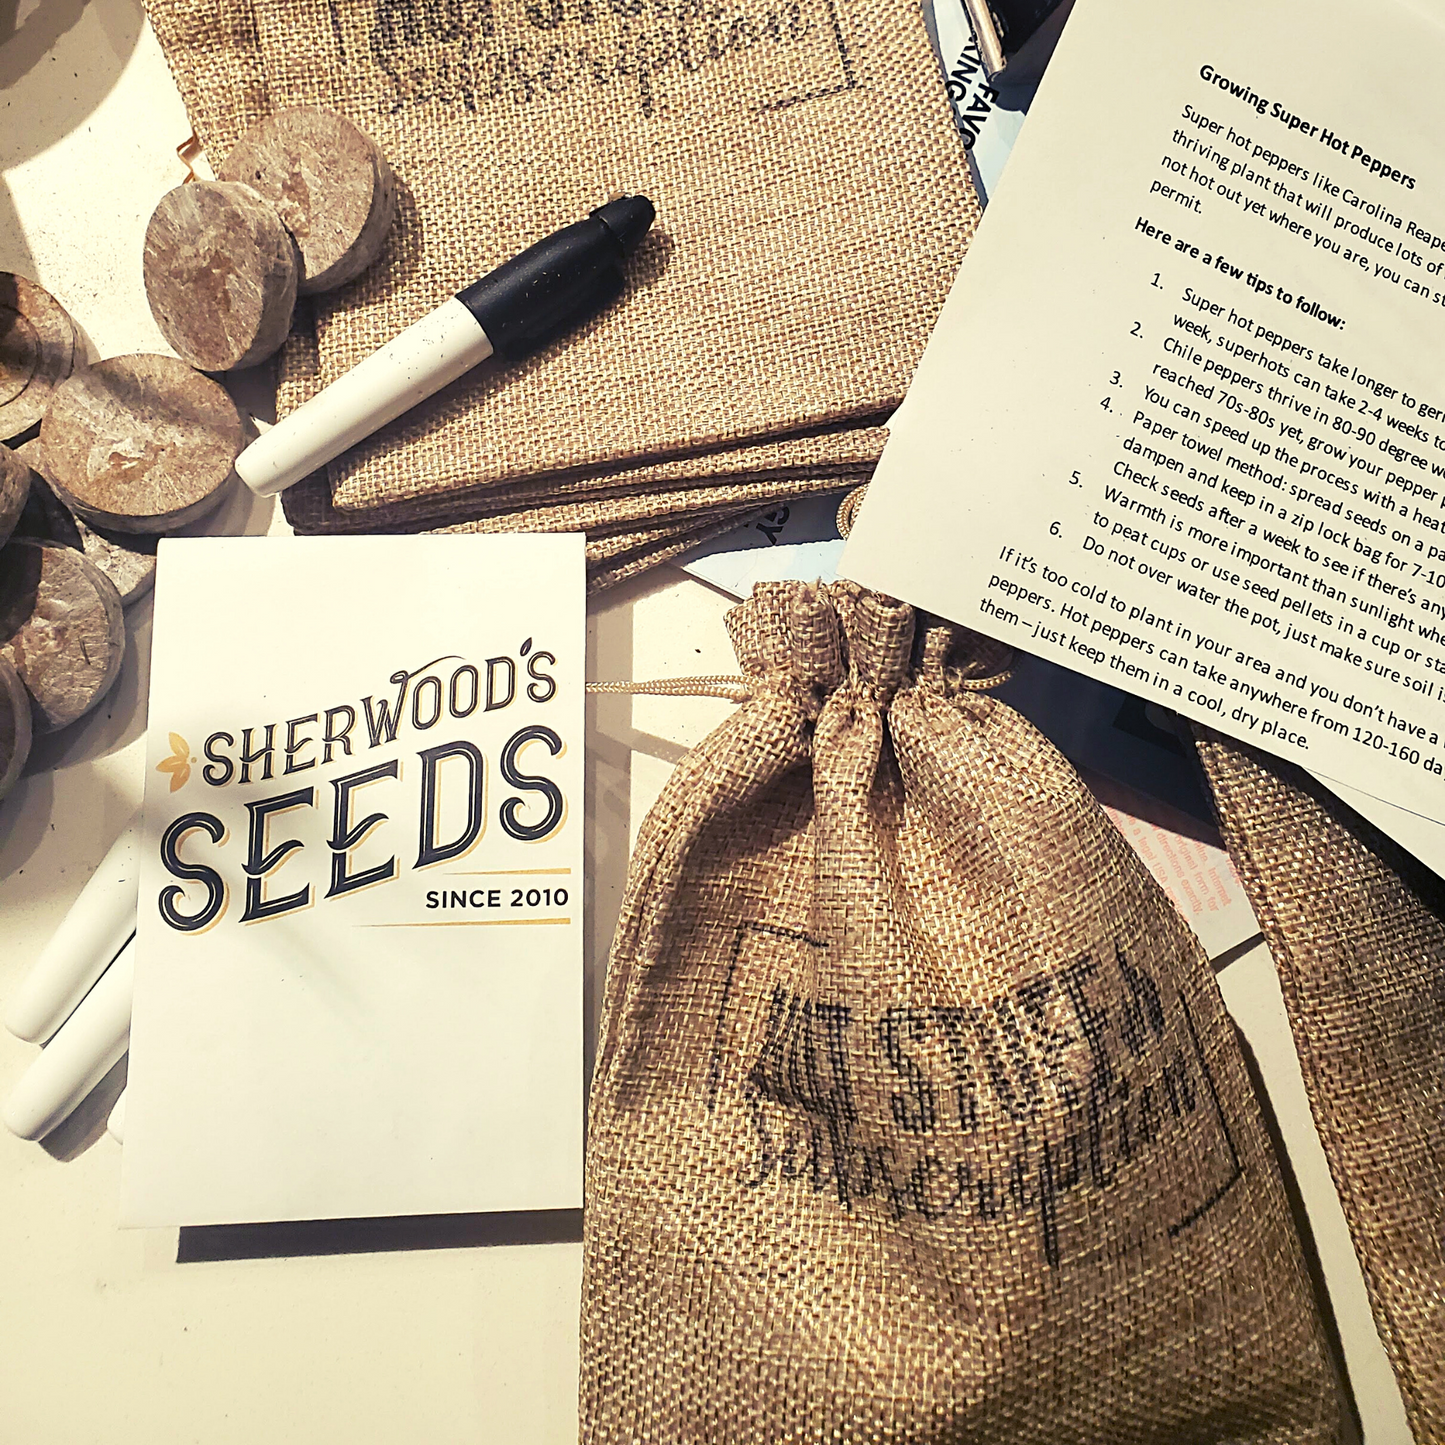 chile pepper seed kit with burlap bag